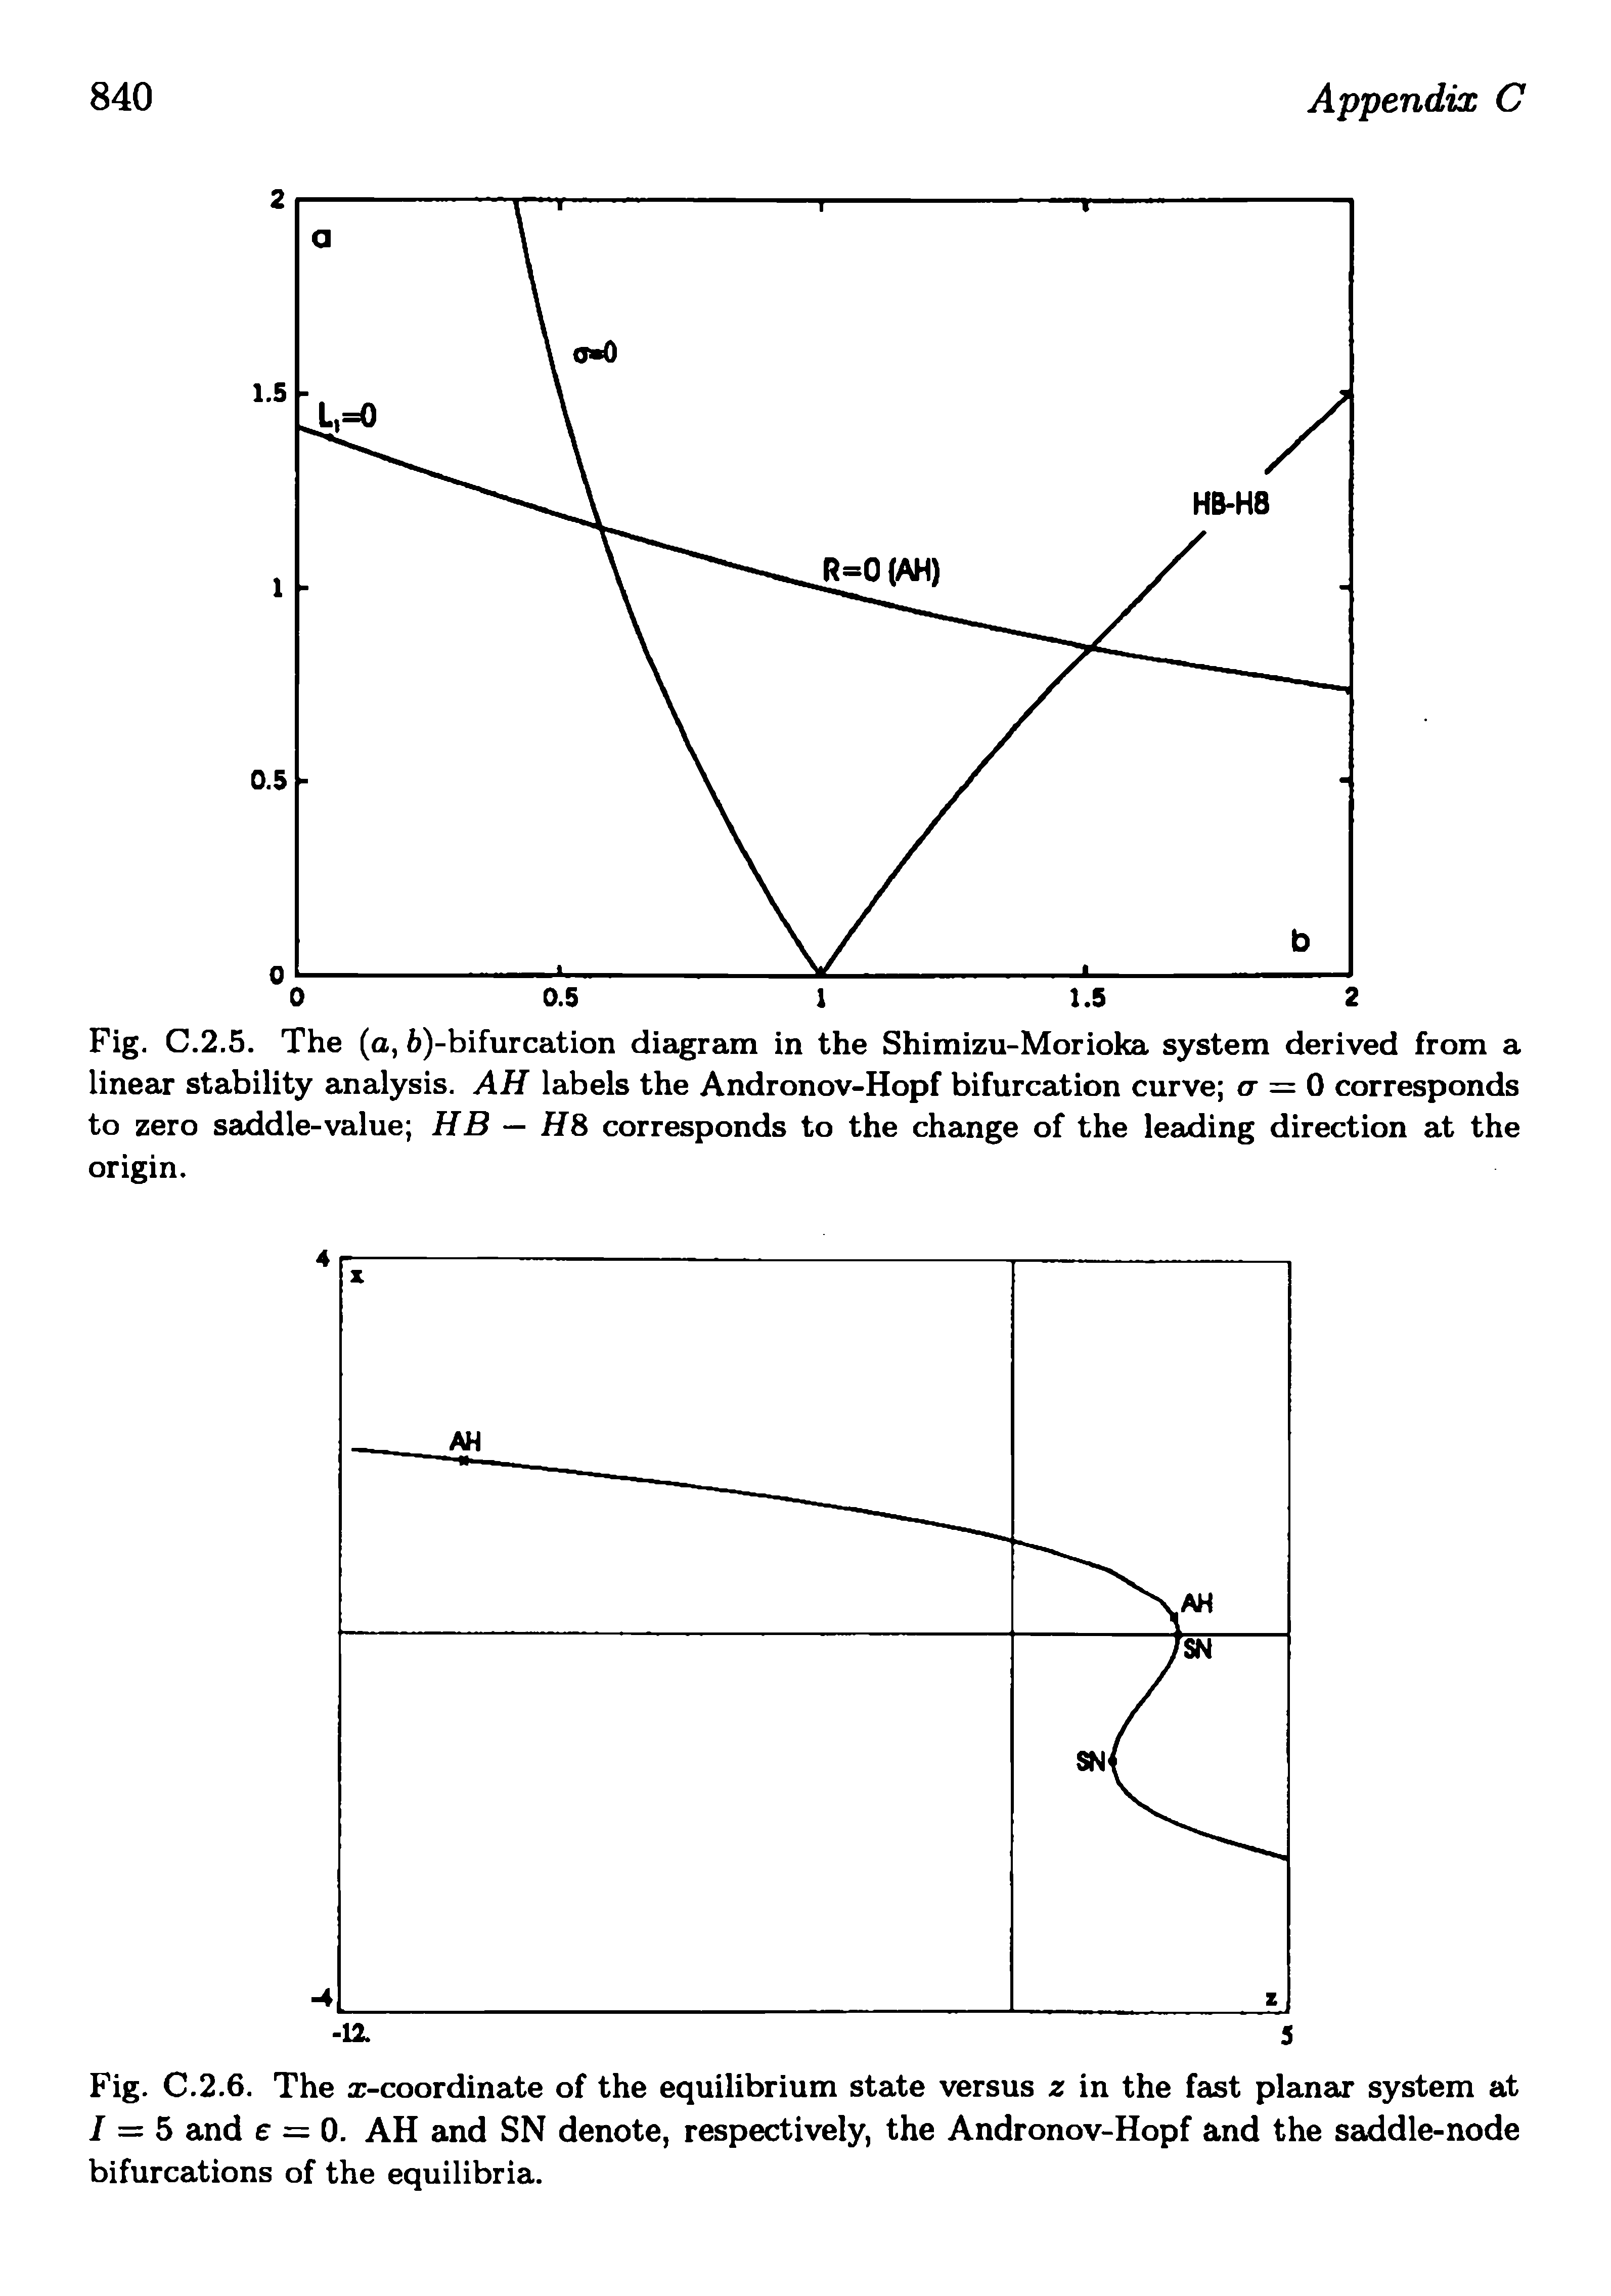 Fig. C.2.5. The (a, 6)-bifurcation diagram in the Shimizu-Morioka system derived from a linear stability analysis. AH labels the Andronov-Hopf bifurcation curve a = 0 corresponds to zero saddle-value HB — H8 corresponds to the change of the leading direction at the origin.